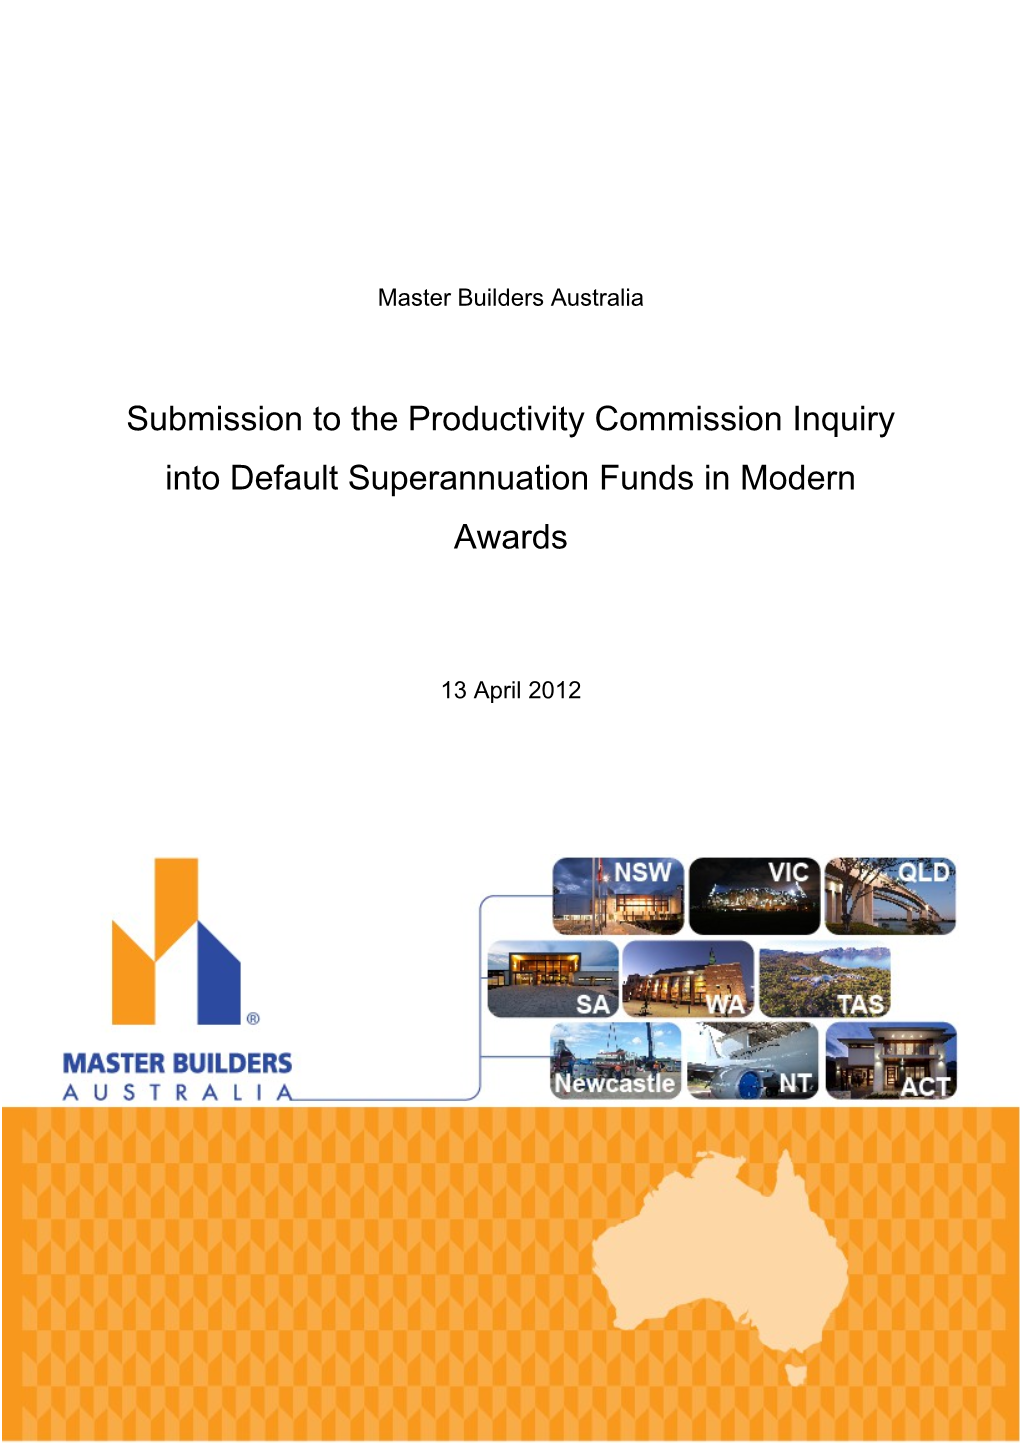 Submission 41 - Master Builders Australia - Default Superannuation Funds in Modern Awards